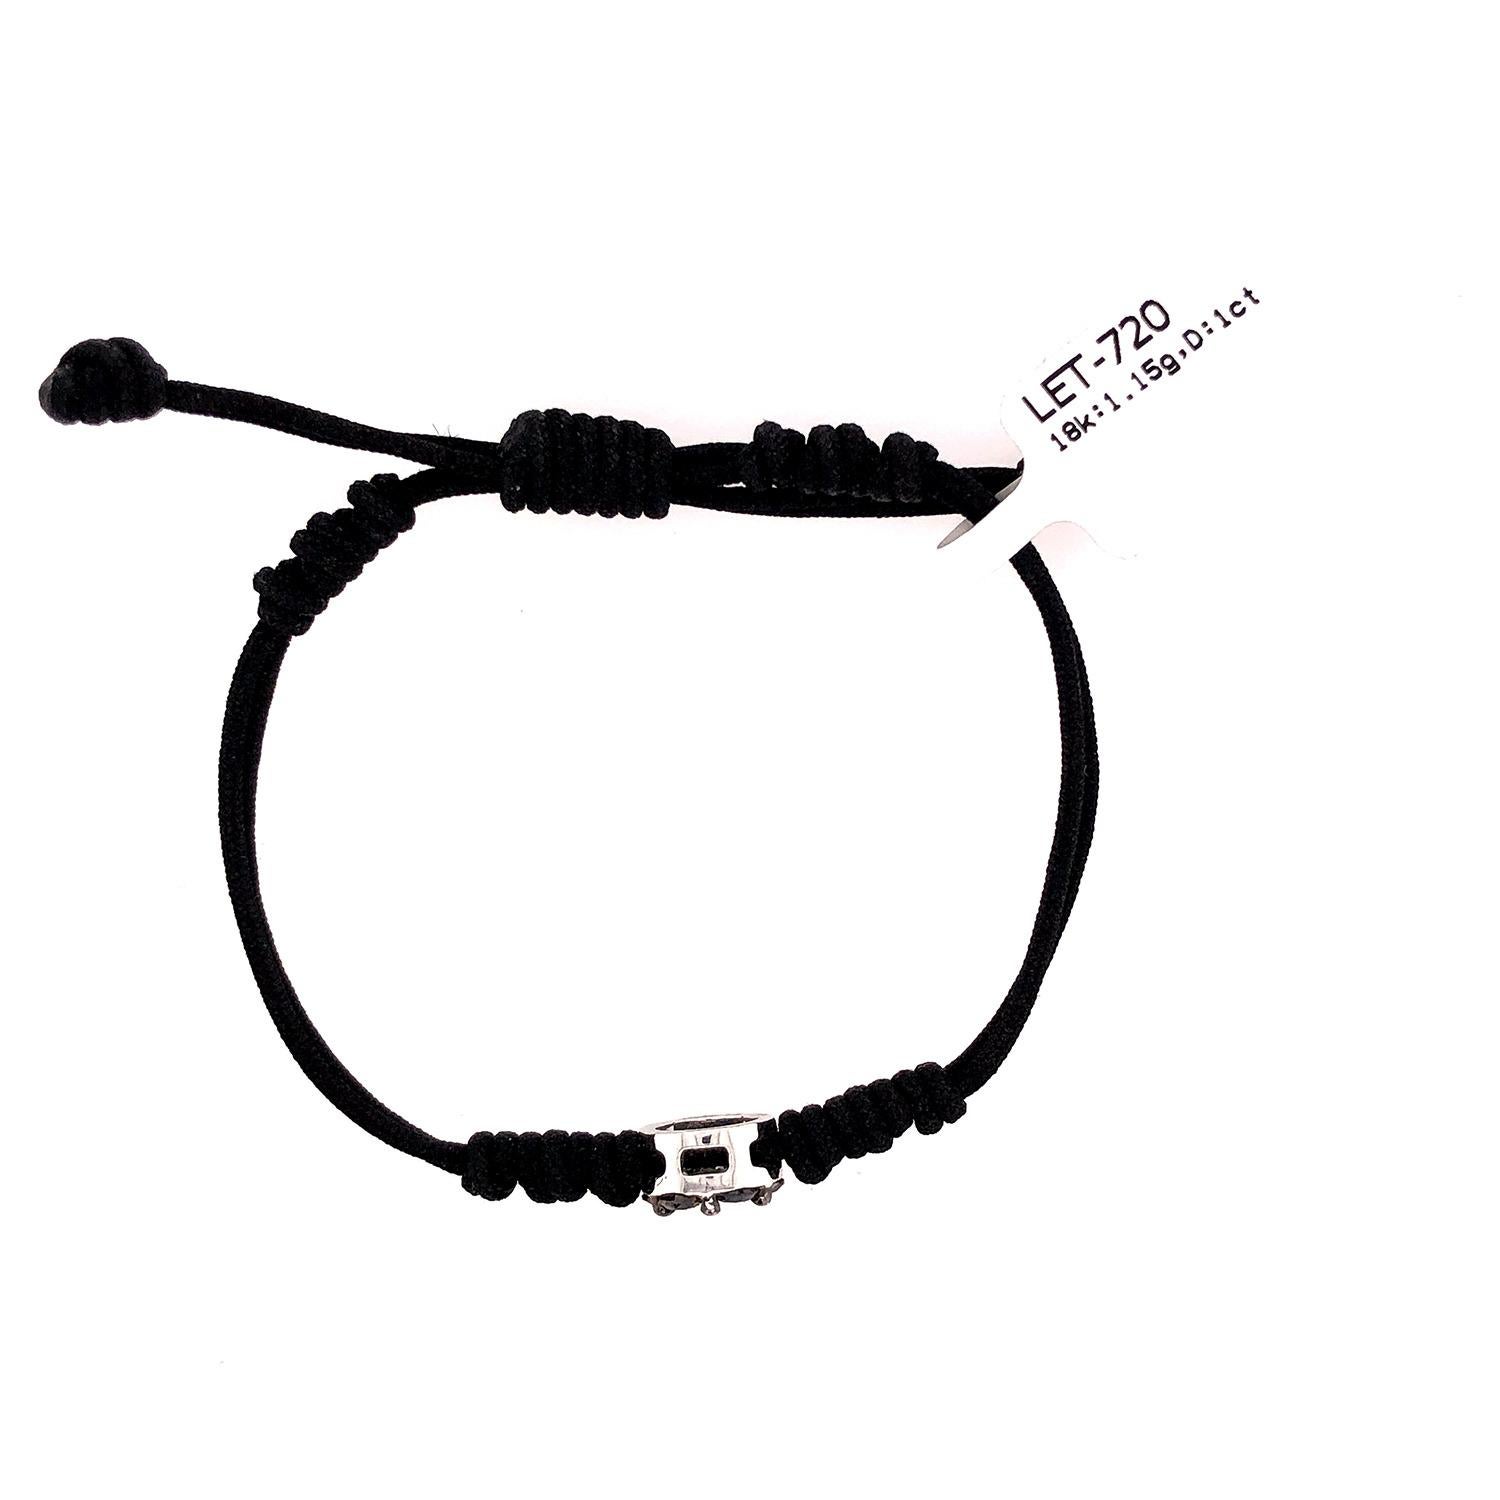 Handmade Macrame Adjustable Bracelet With Rose Cut Black Diamonds Charm In New Condition For Sale In New York, NY